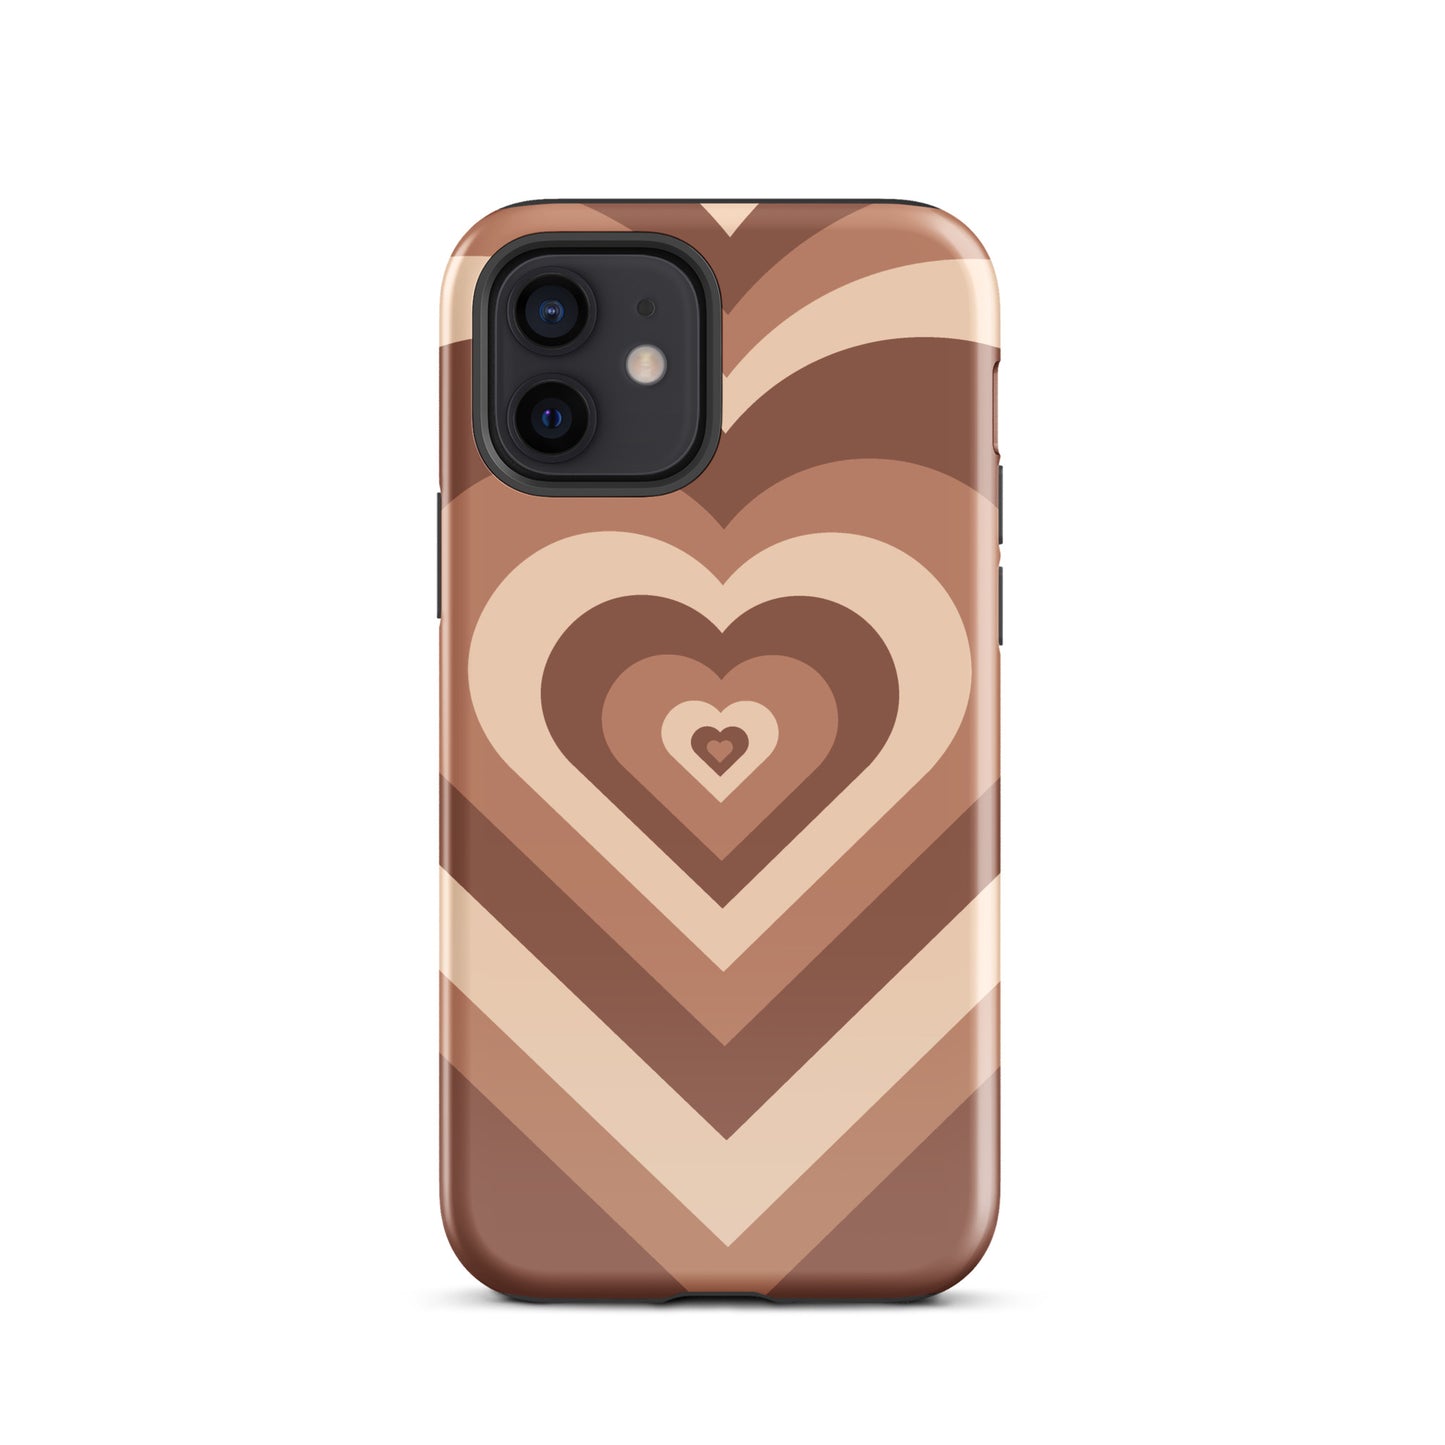 Choco Hearts iPhone Case iPhone 12 Glossy